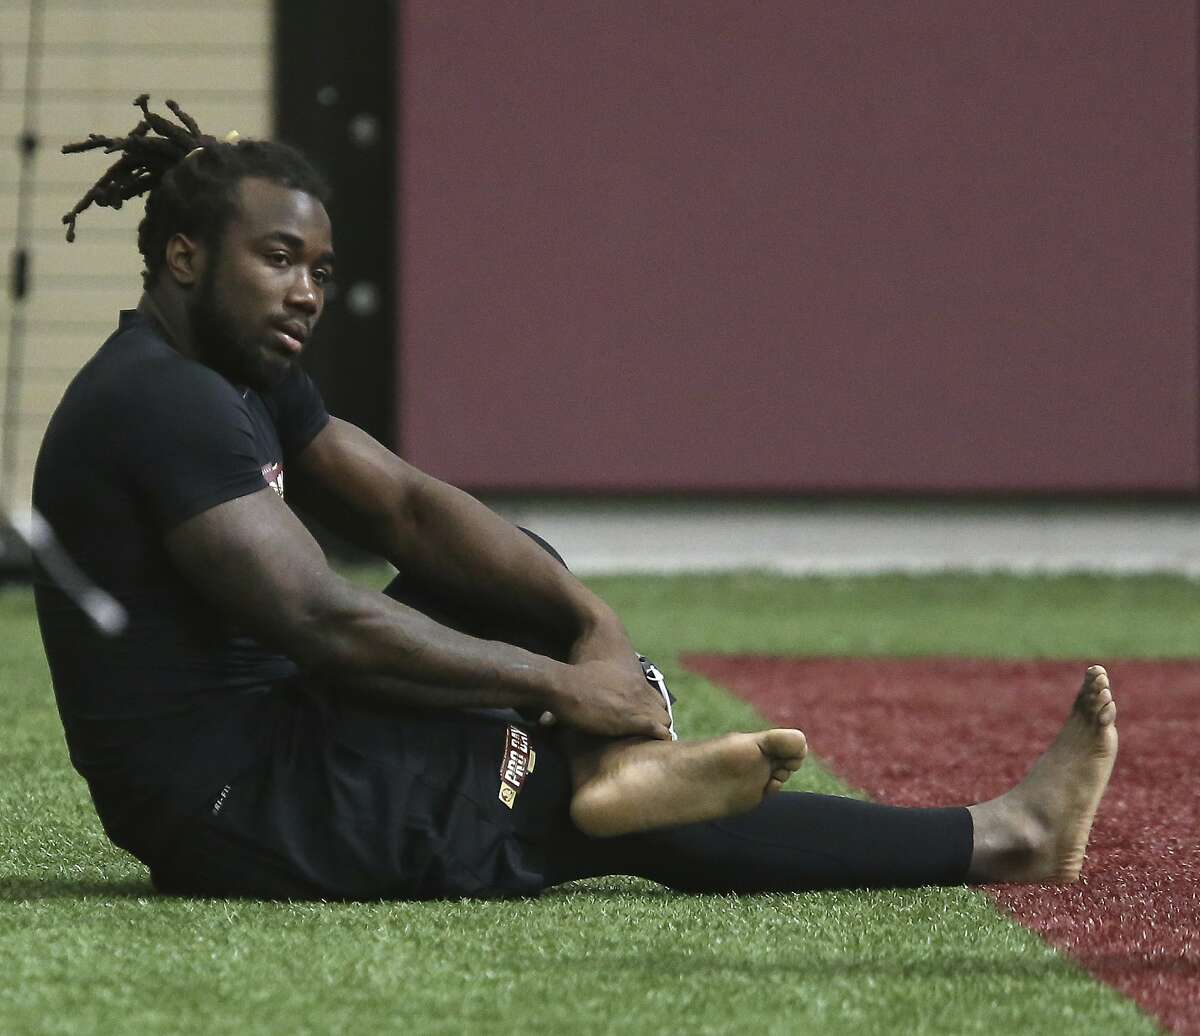 Dalvin Cook stretches prior to running drills for NFL scouts during Florida State's pro day, Tuesday, March 28, 2017 in Tallahassee, Fla. (AP Photo/Steve Cannon)